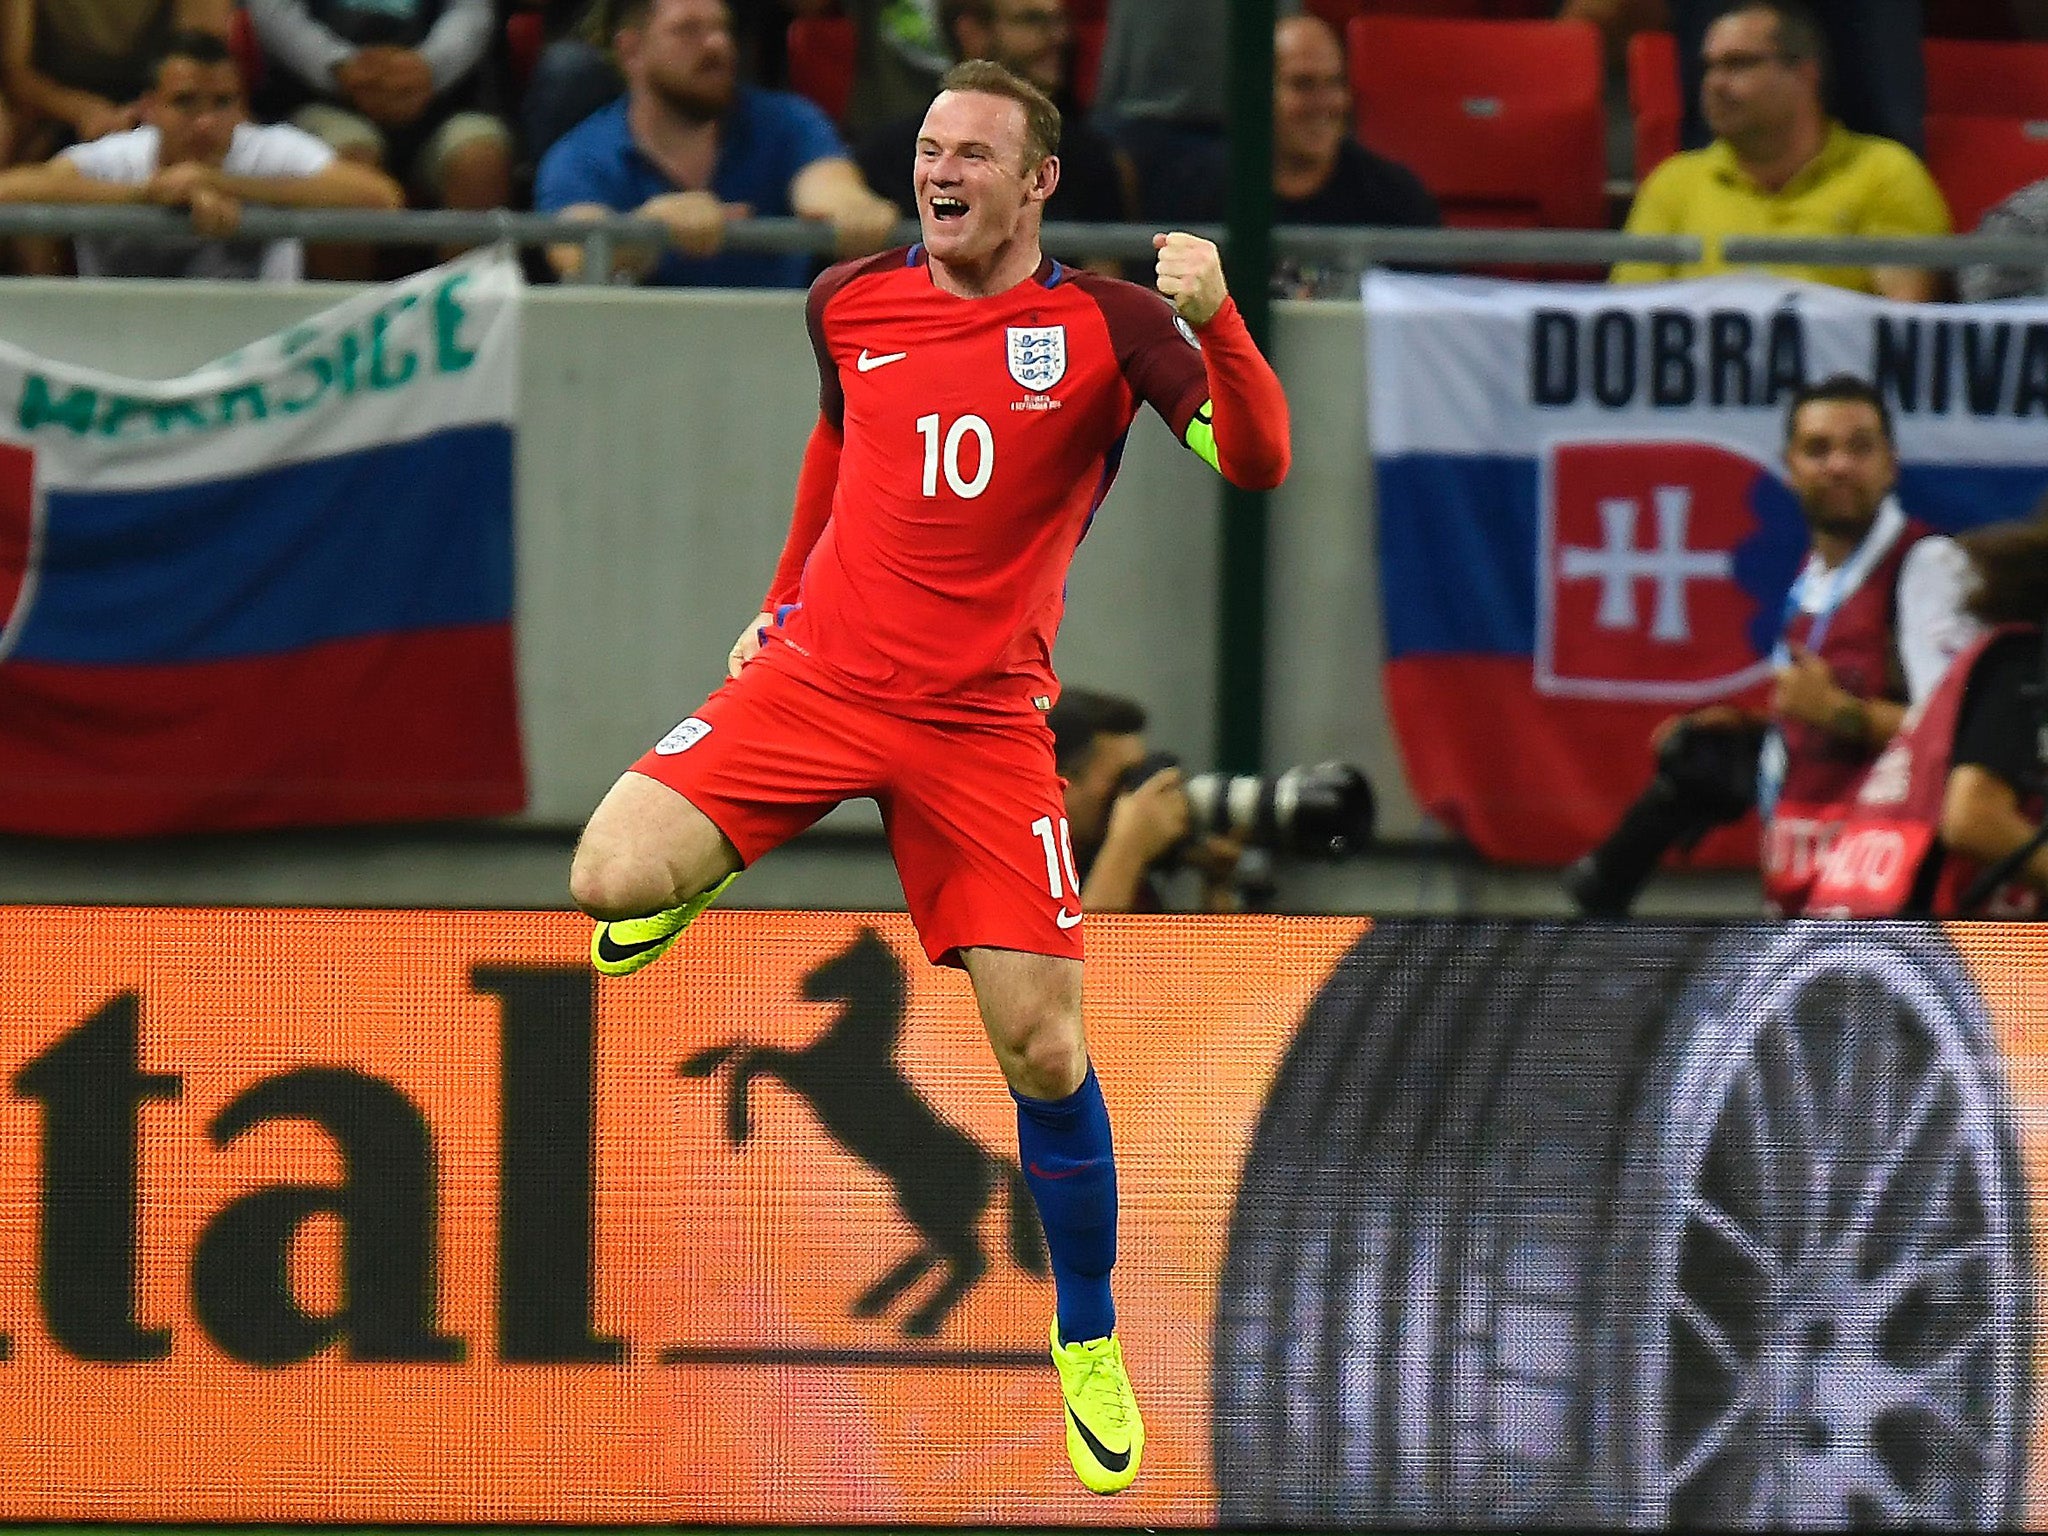 Rooney was happy with what Southgate said about him